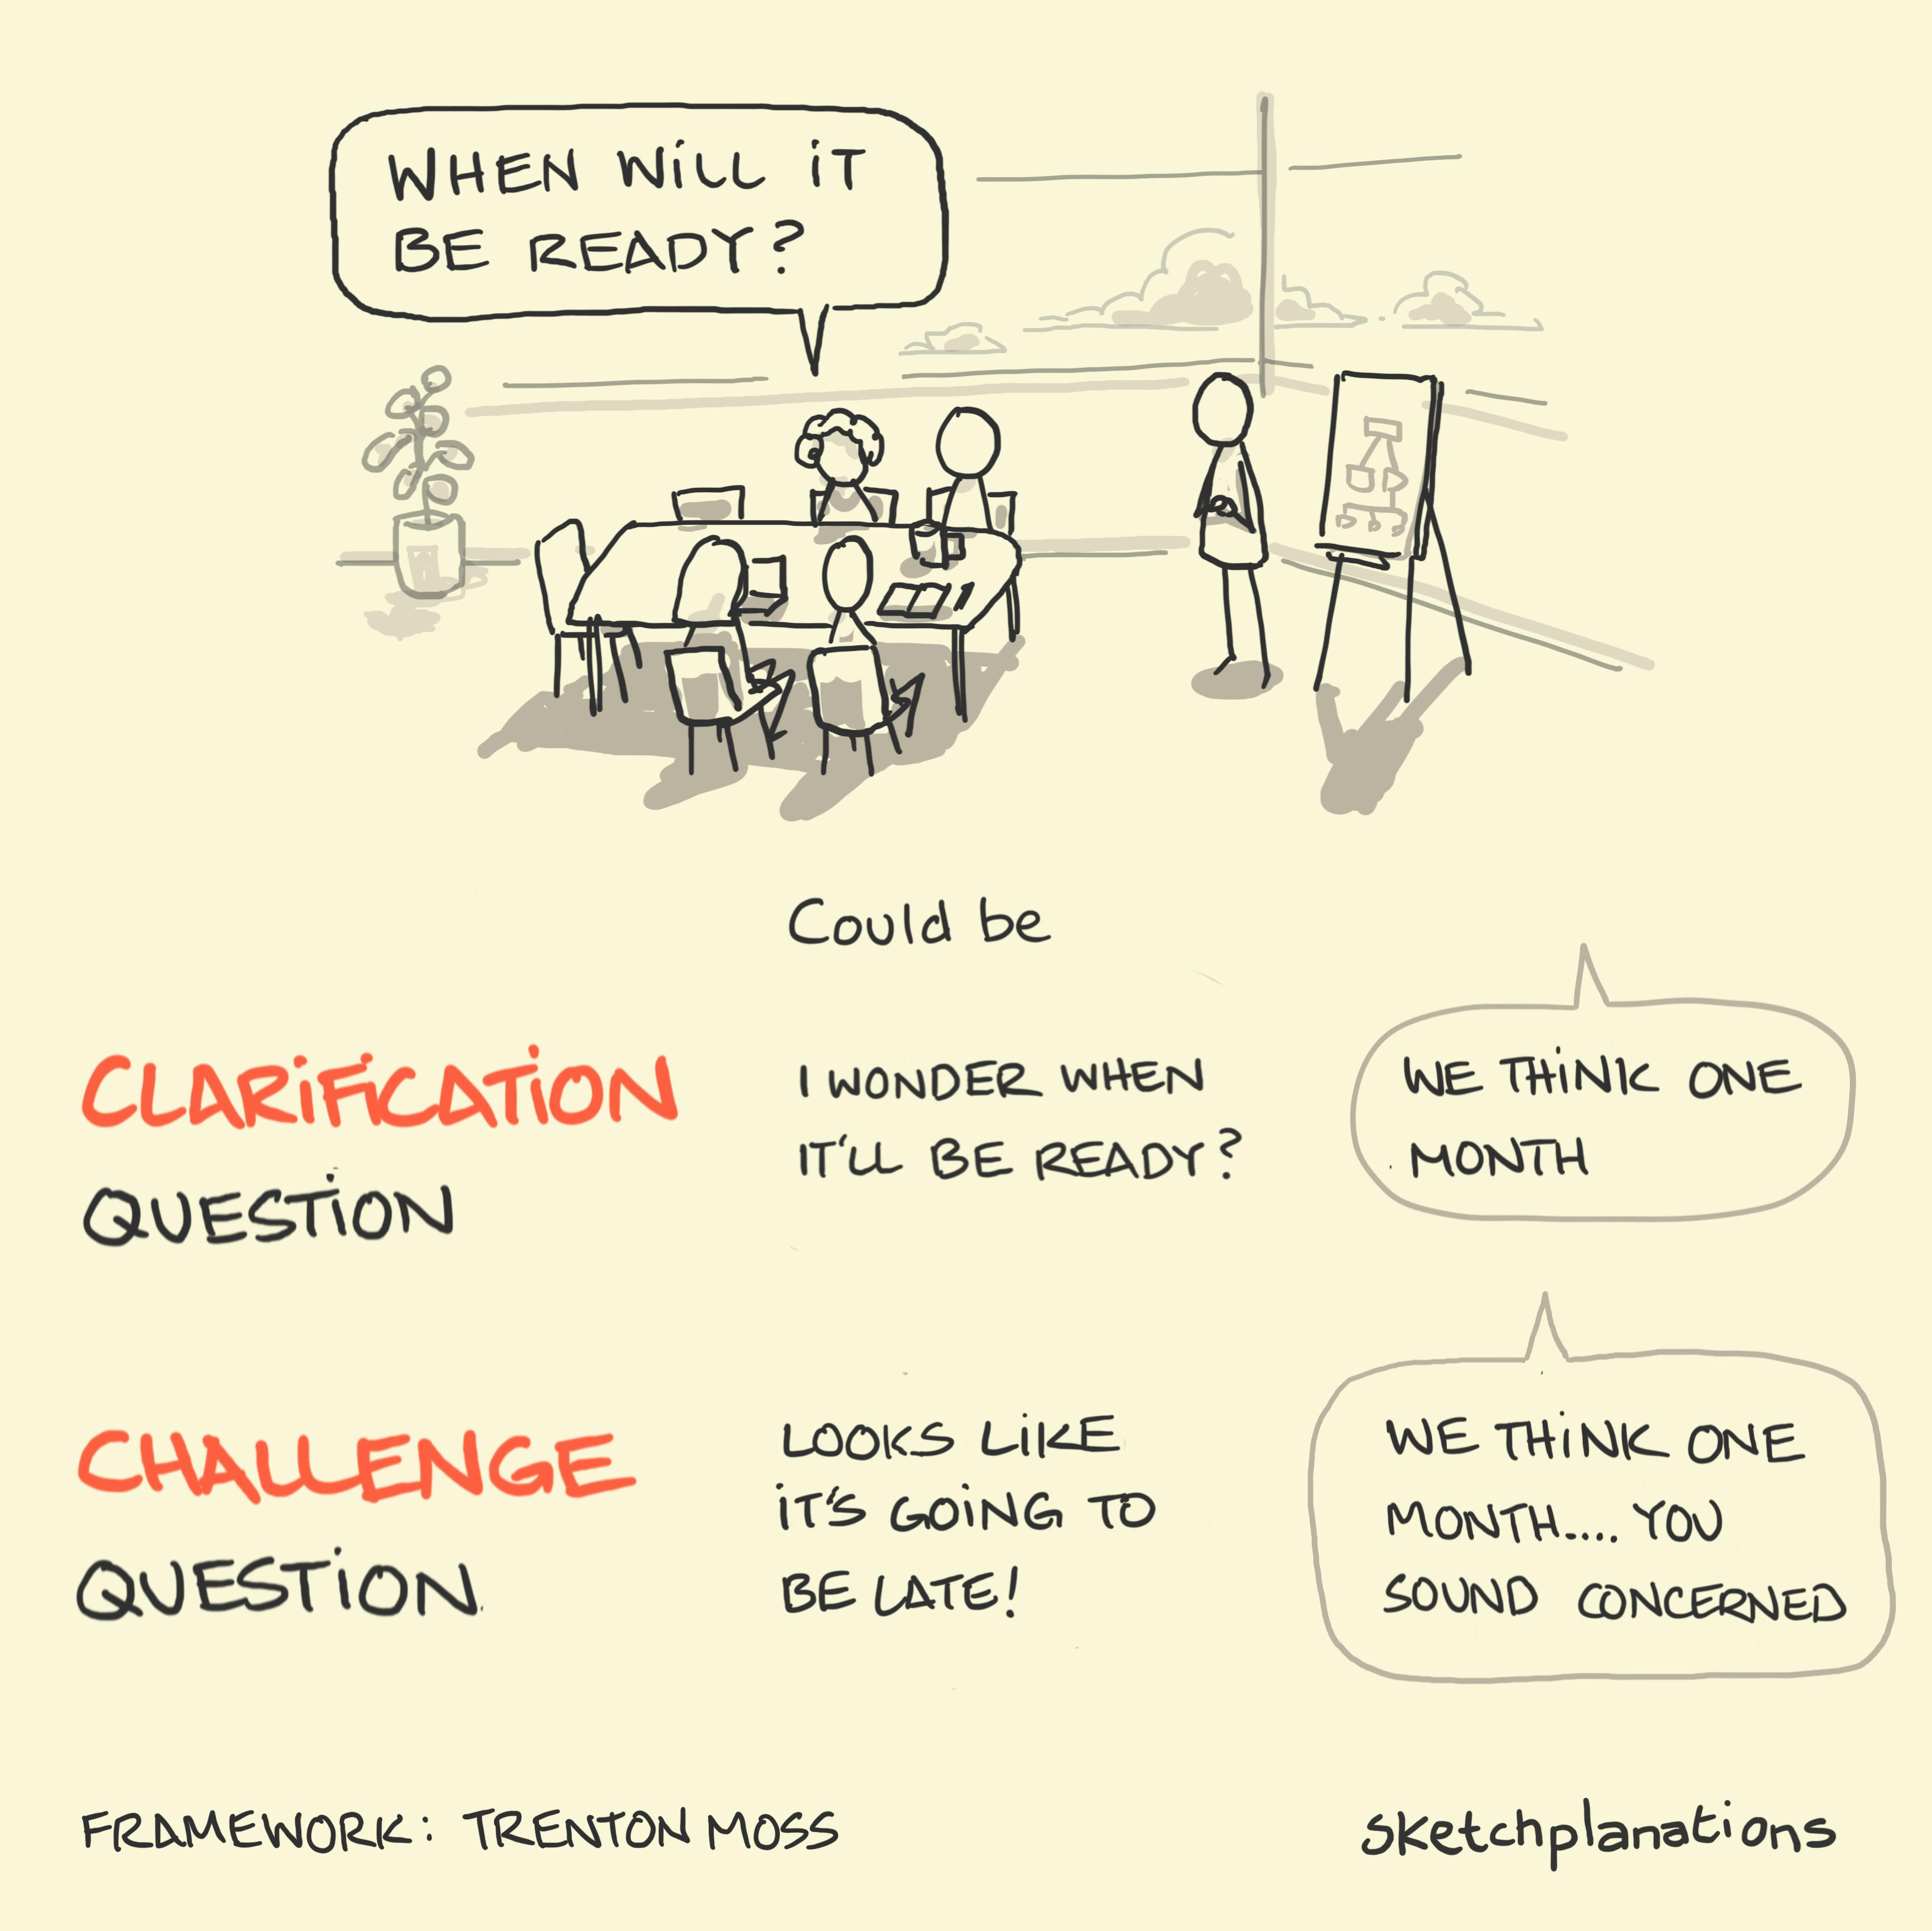 Challenge questions and clarification questions: 2 different interpretations of the question 'When will it be ready?' as either a clarification question, or a challenge question